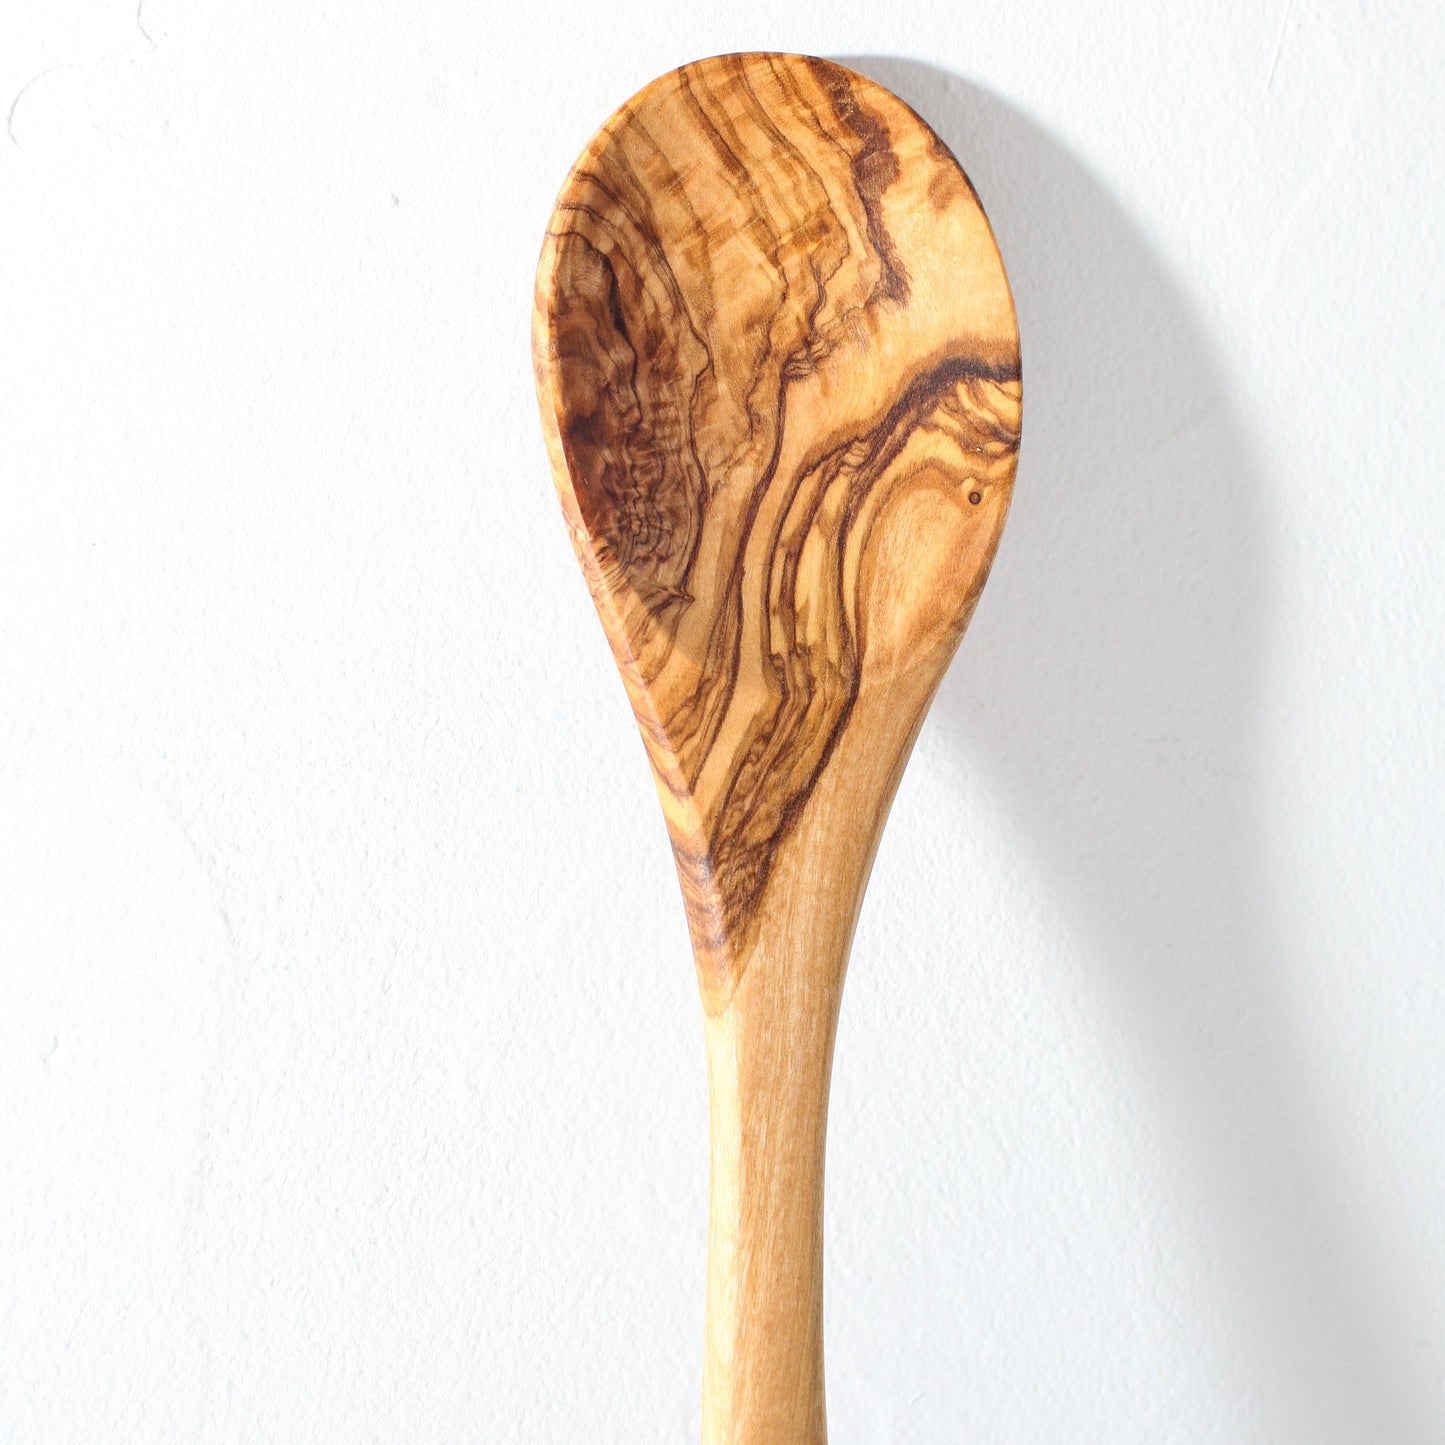 a detail shot of an olive wood spoon wood grain